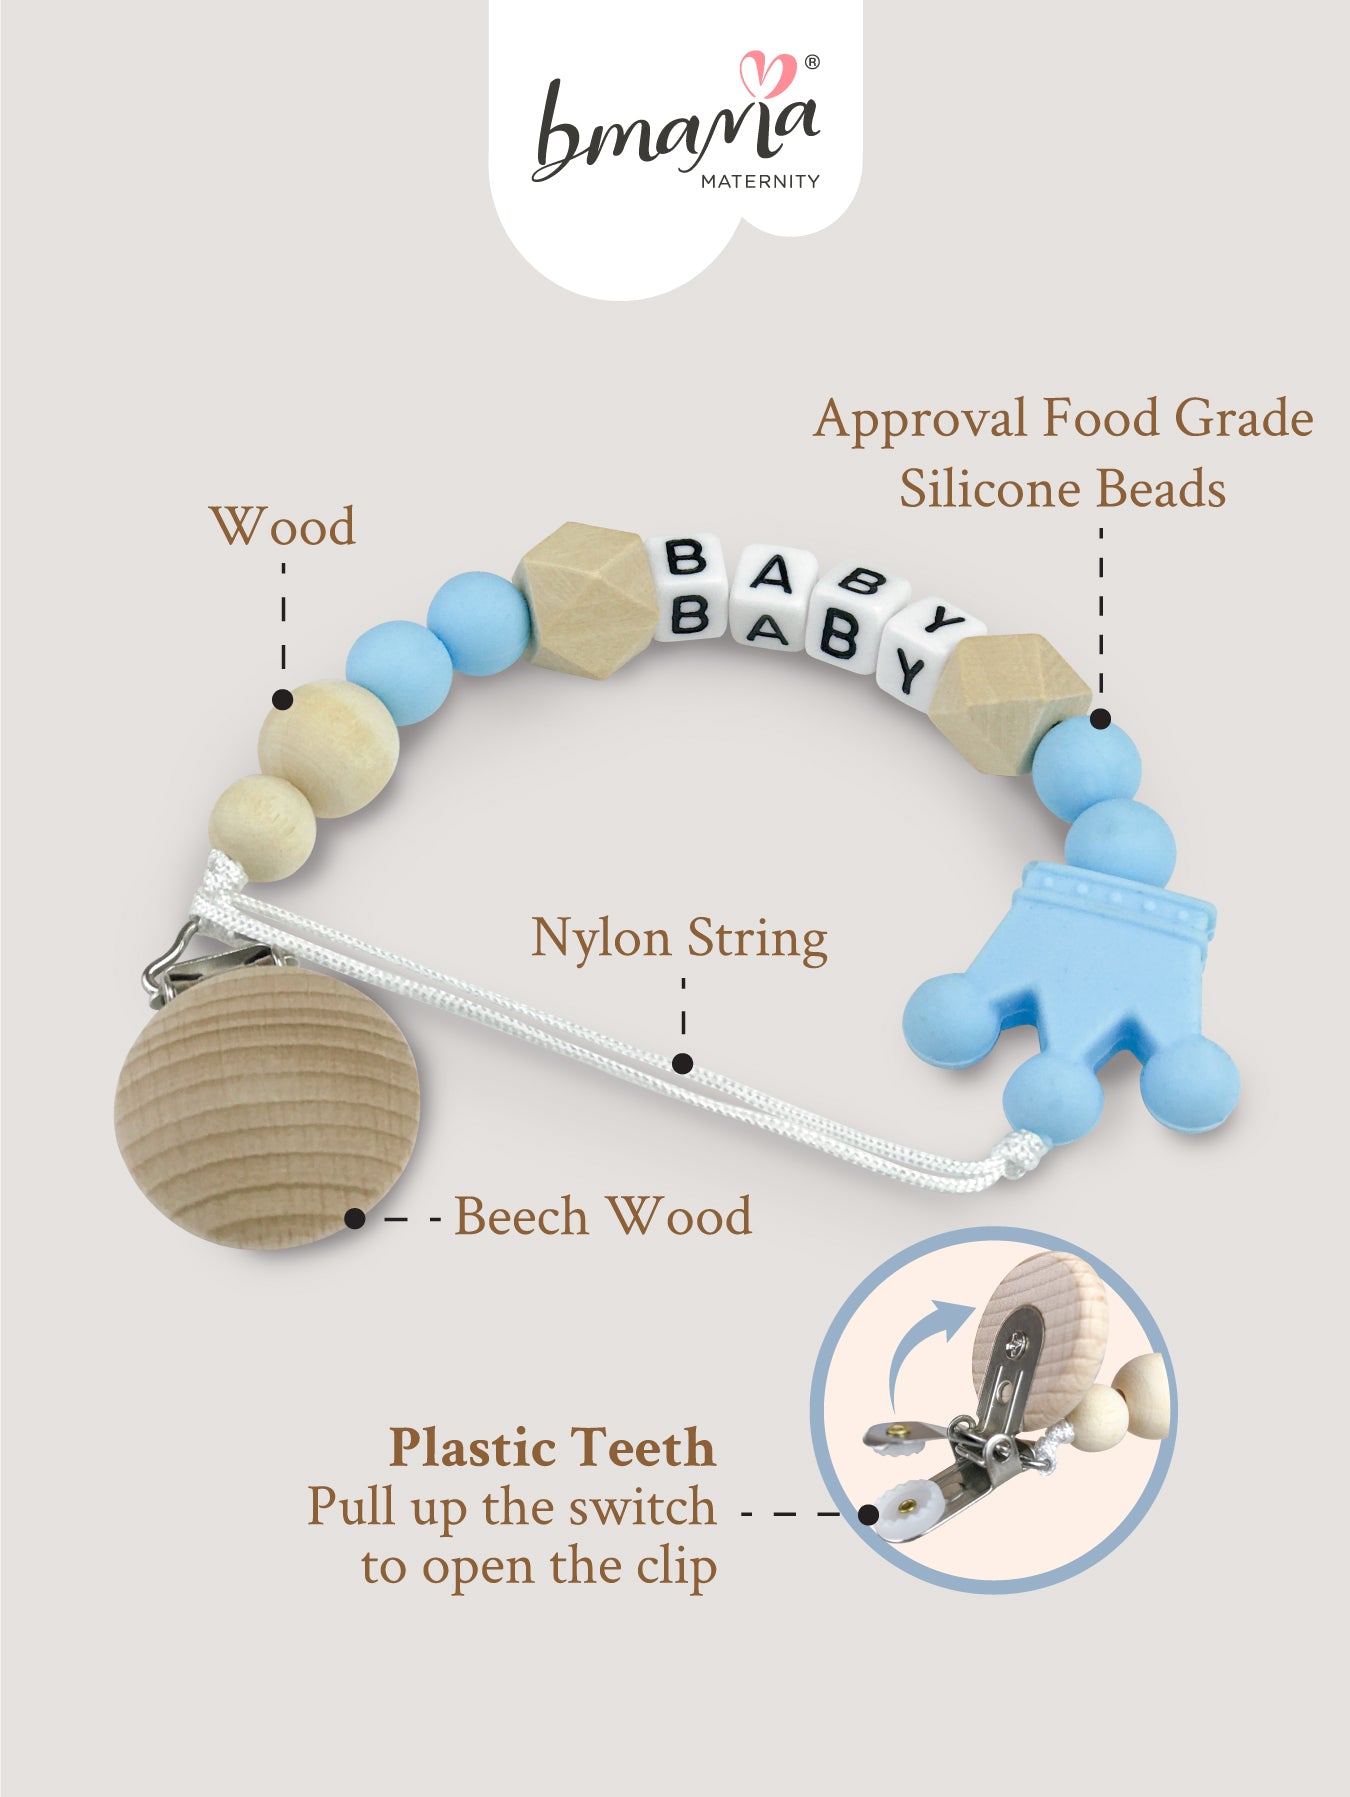 Easy-to-use pacifier clips